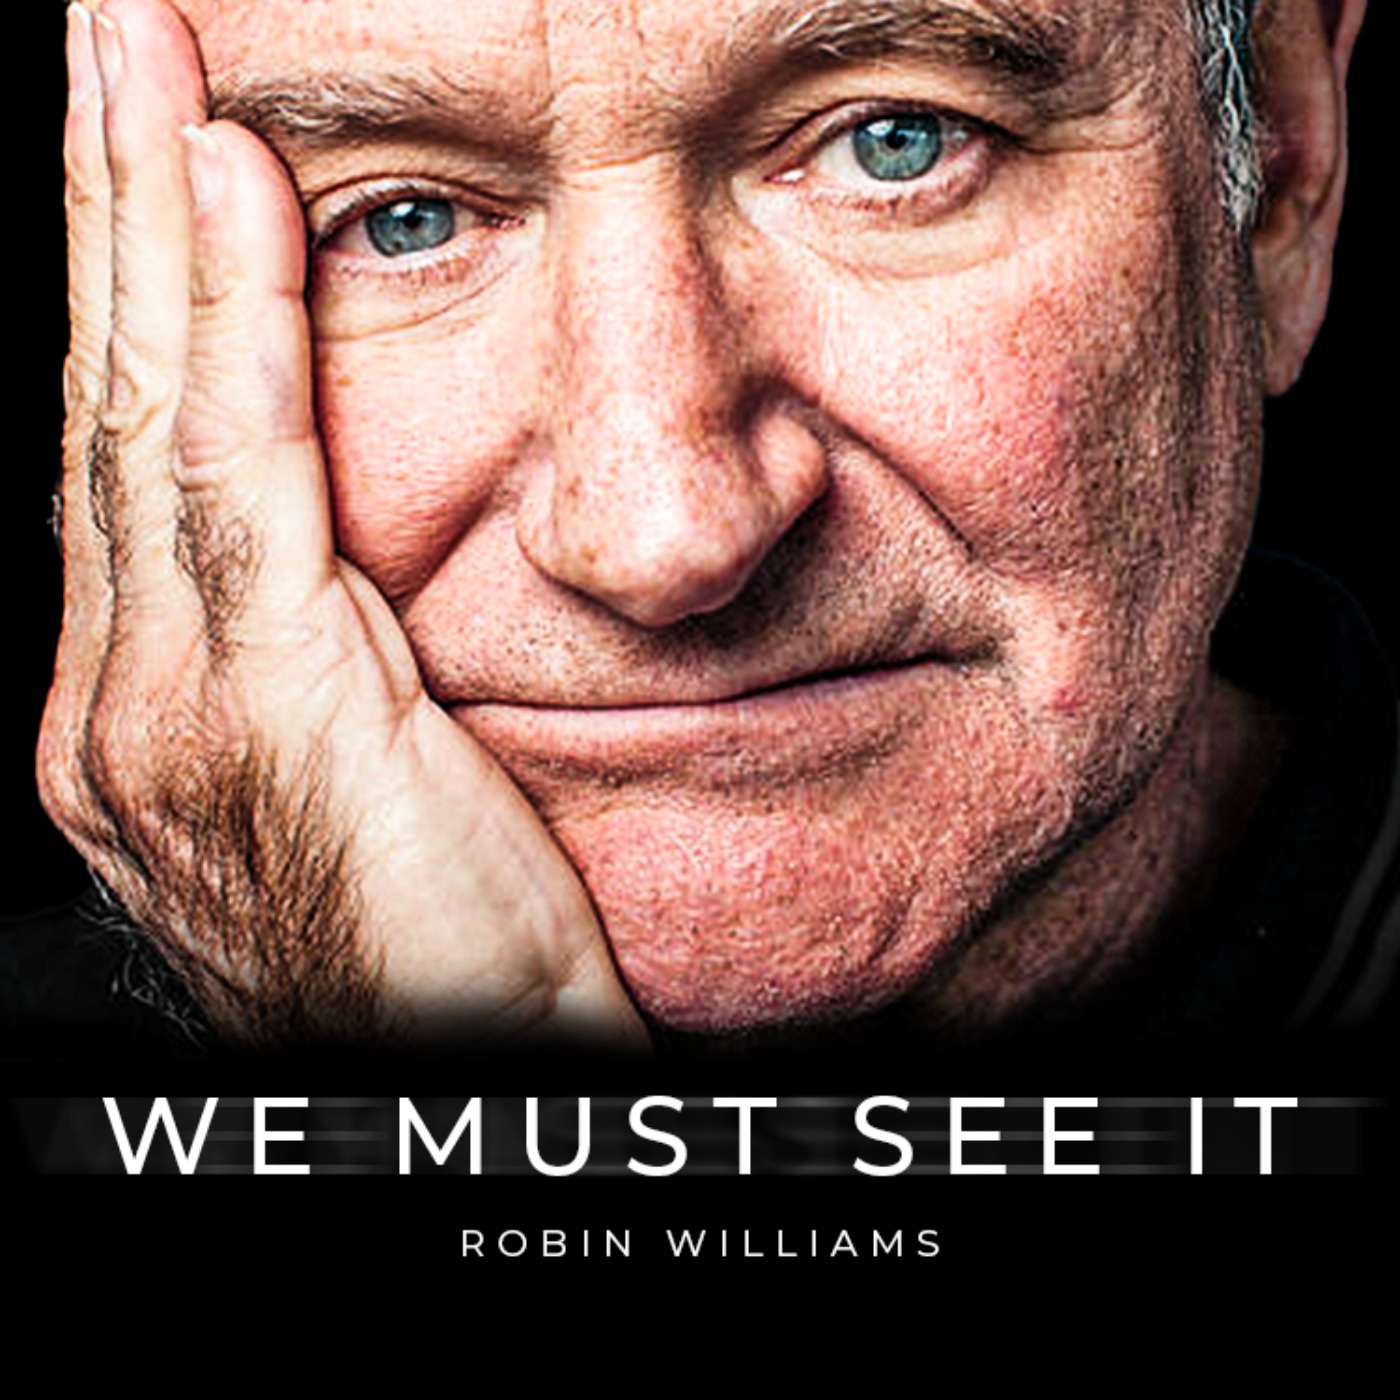 We Must See It Before It’s Too Late - Robin Williams' Powerful Message For Humanity